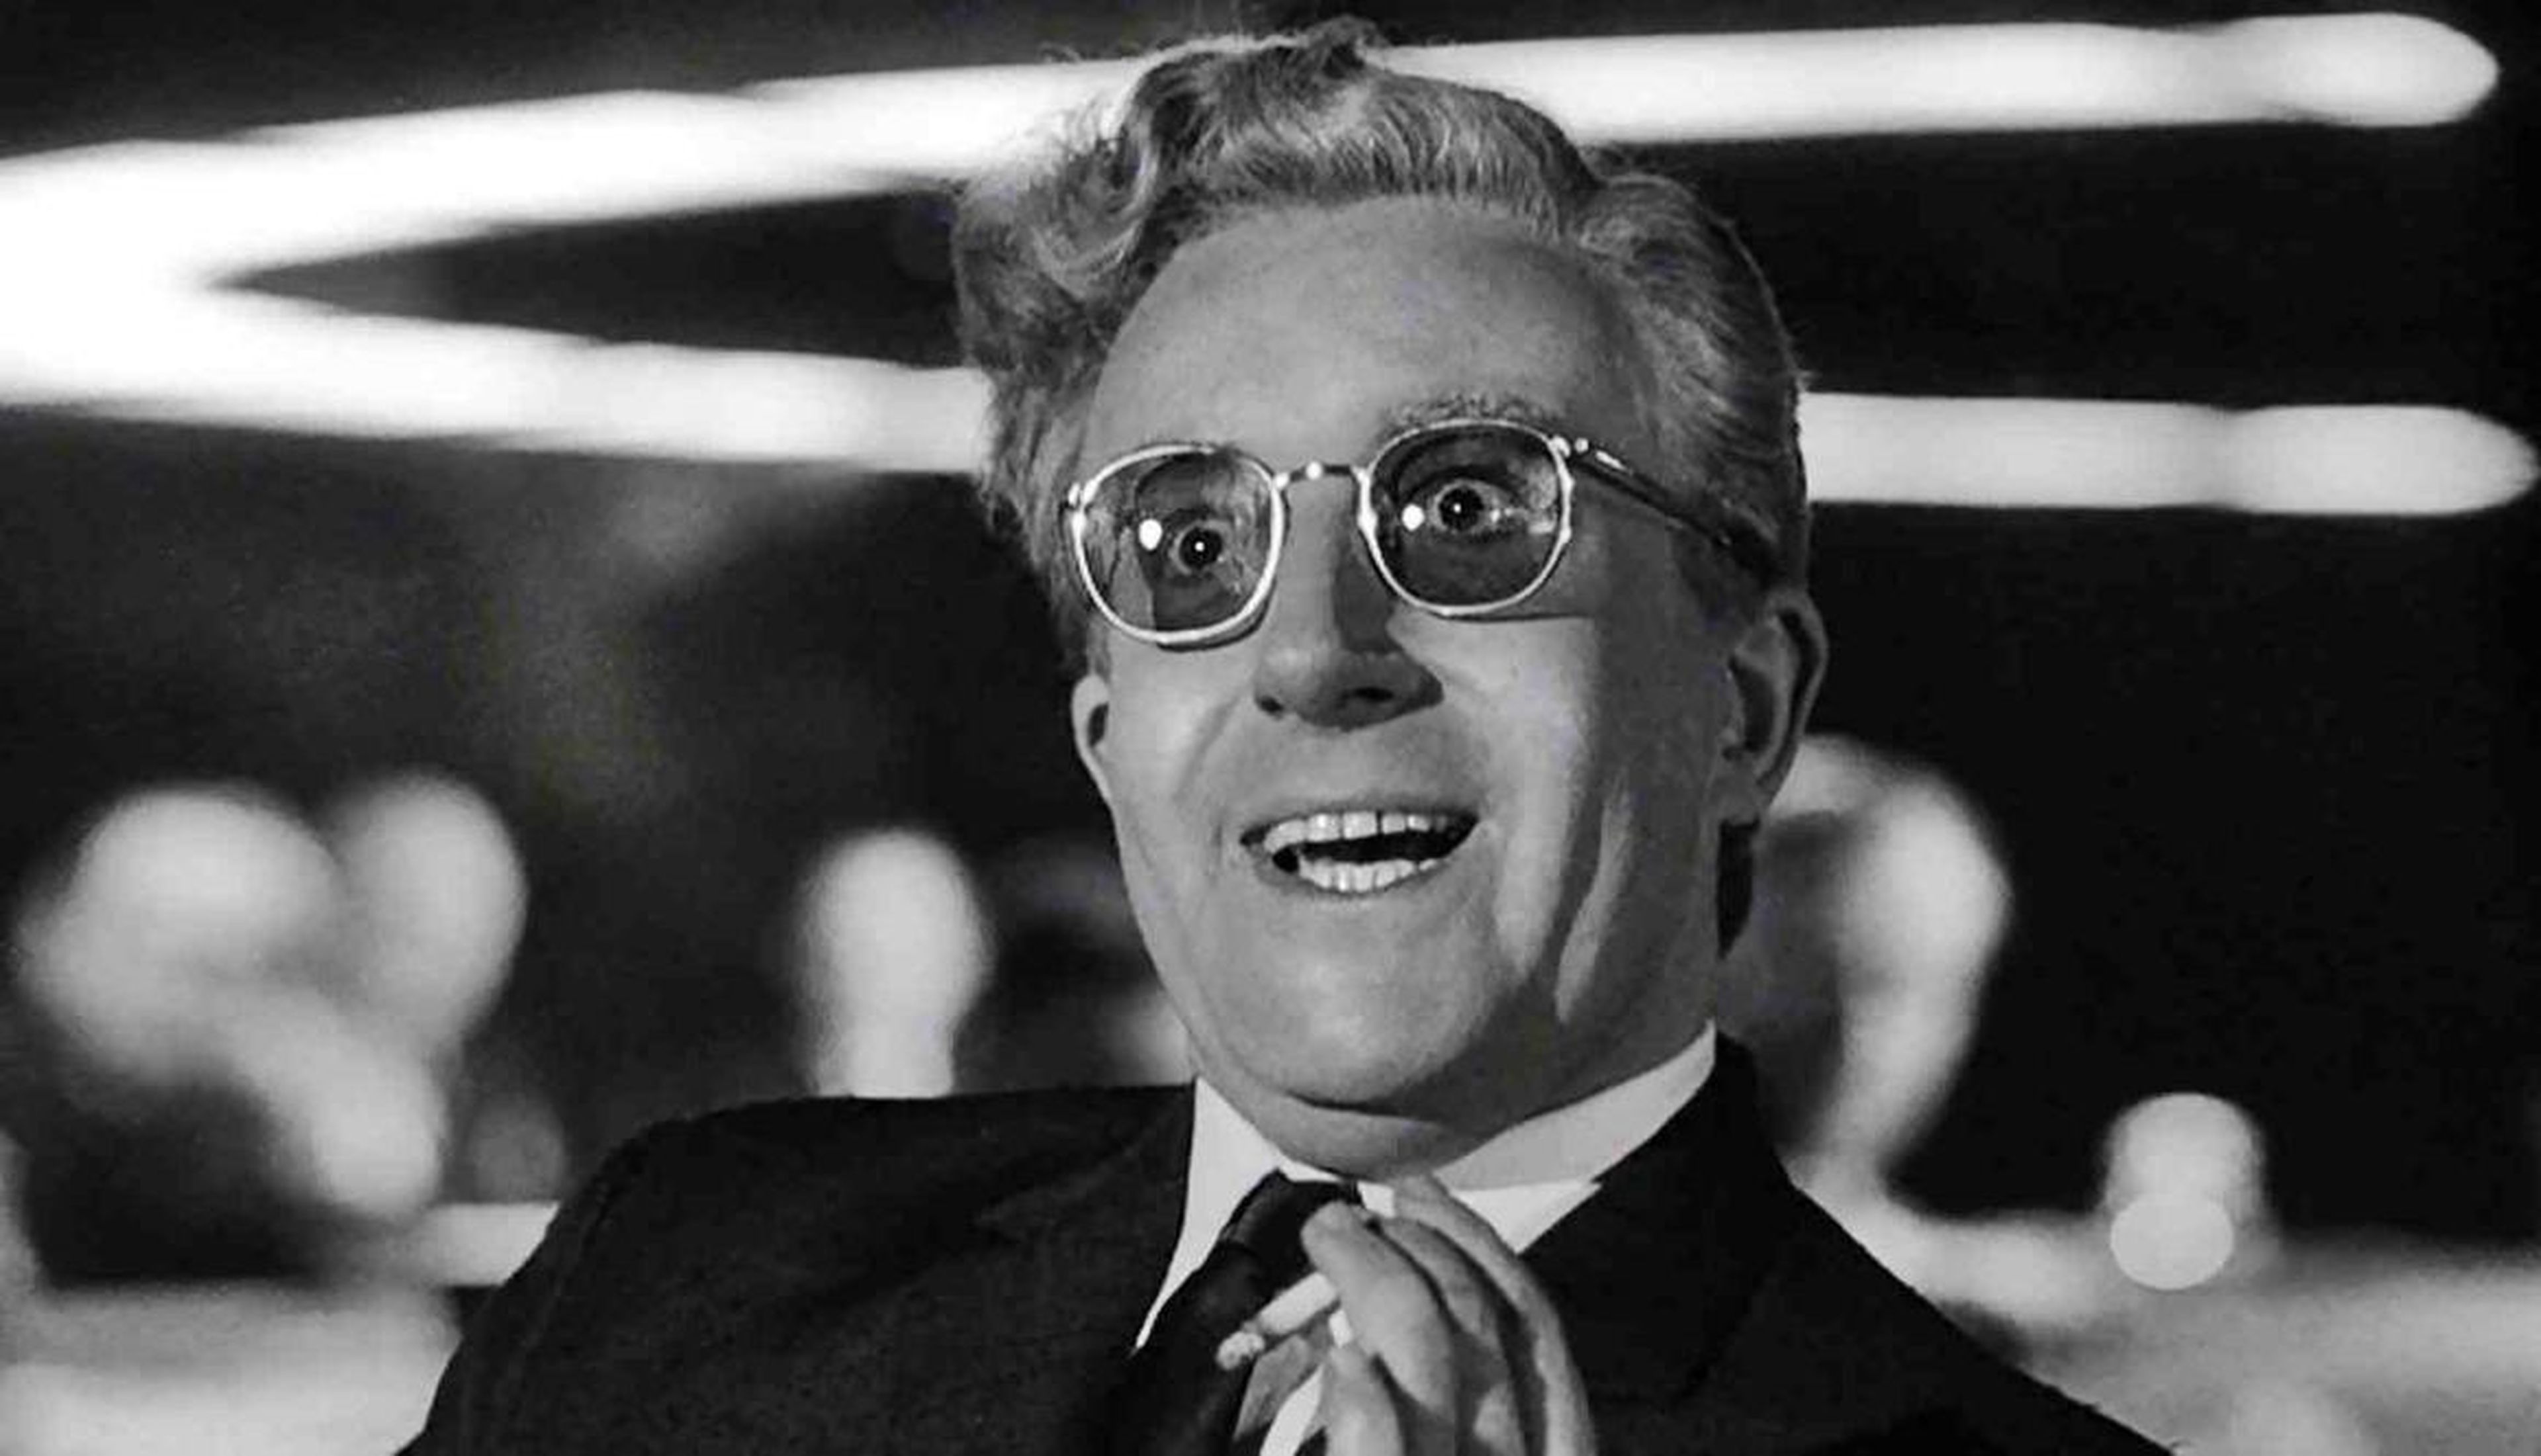 26. "Dr. Strangelove or: How I Learned to Stop Worrying and Love the Bomb" (1964)